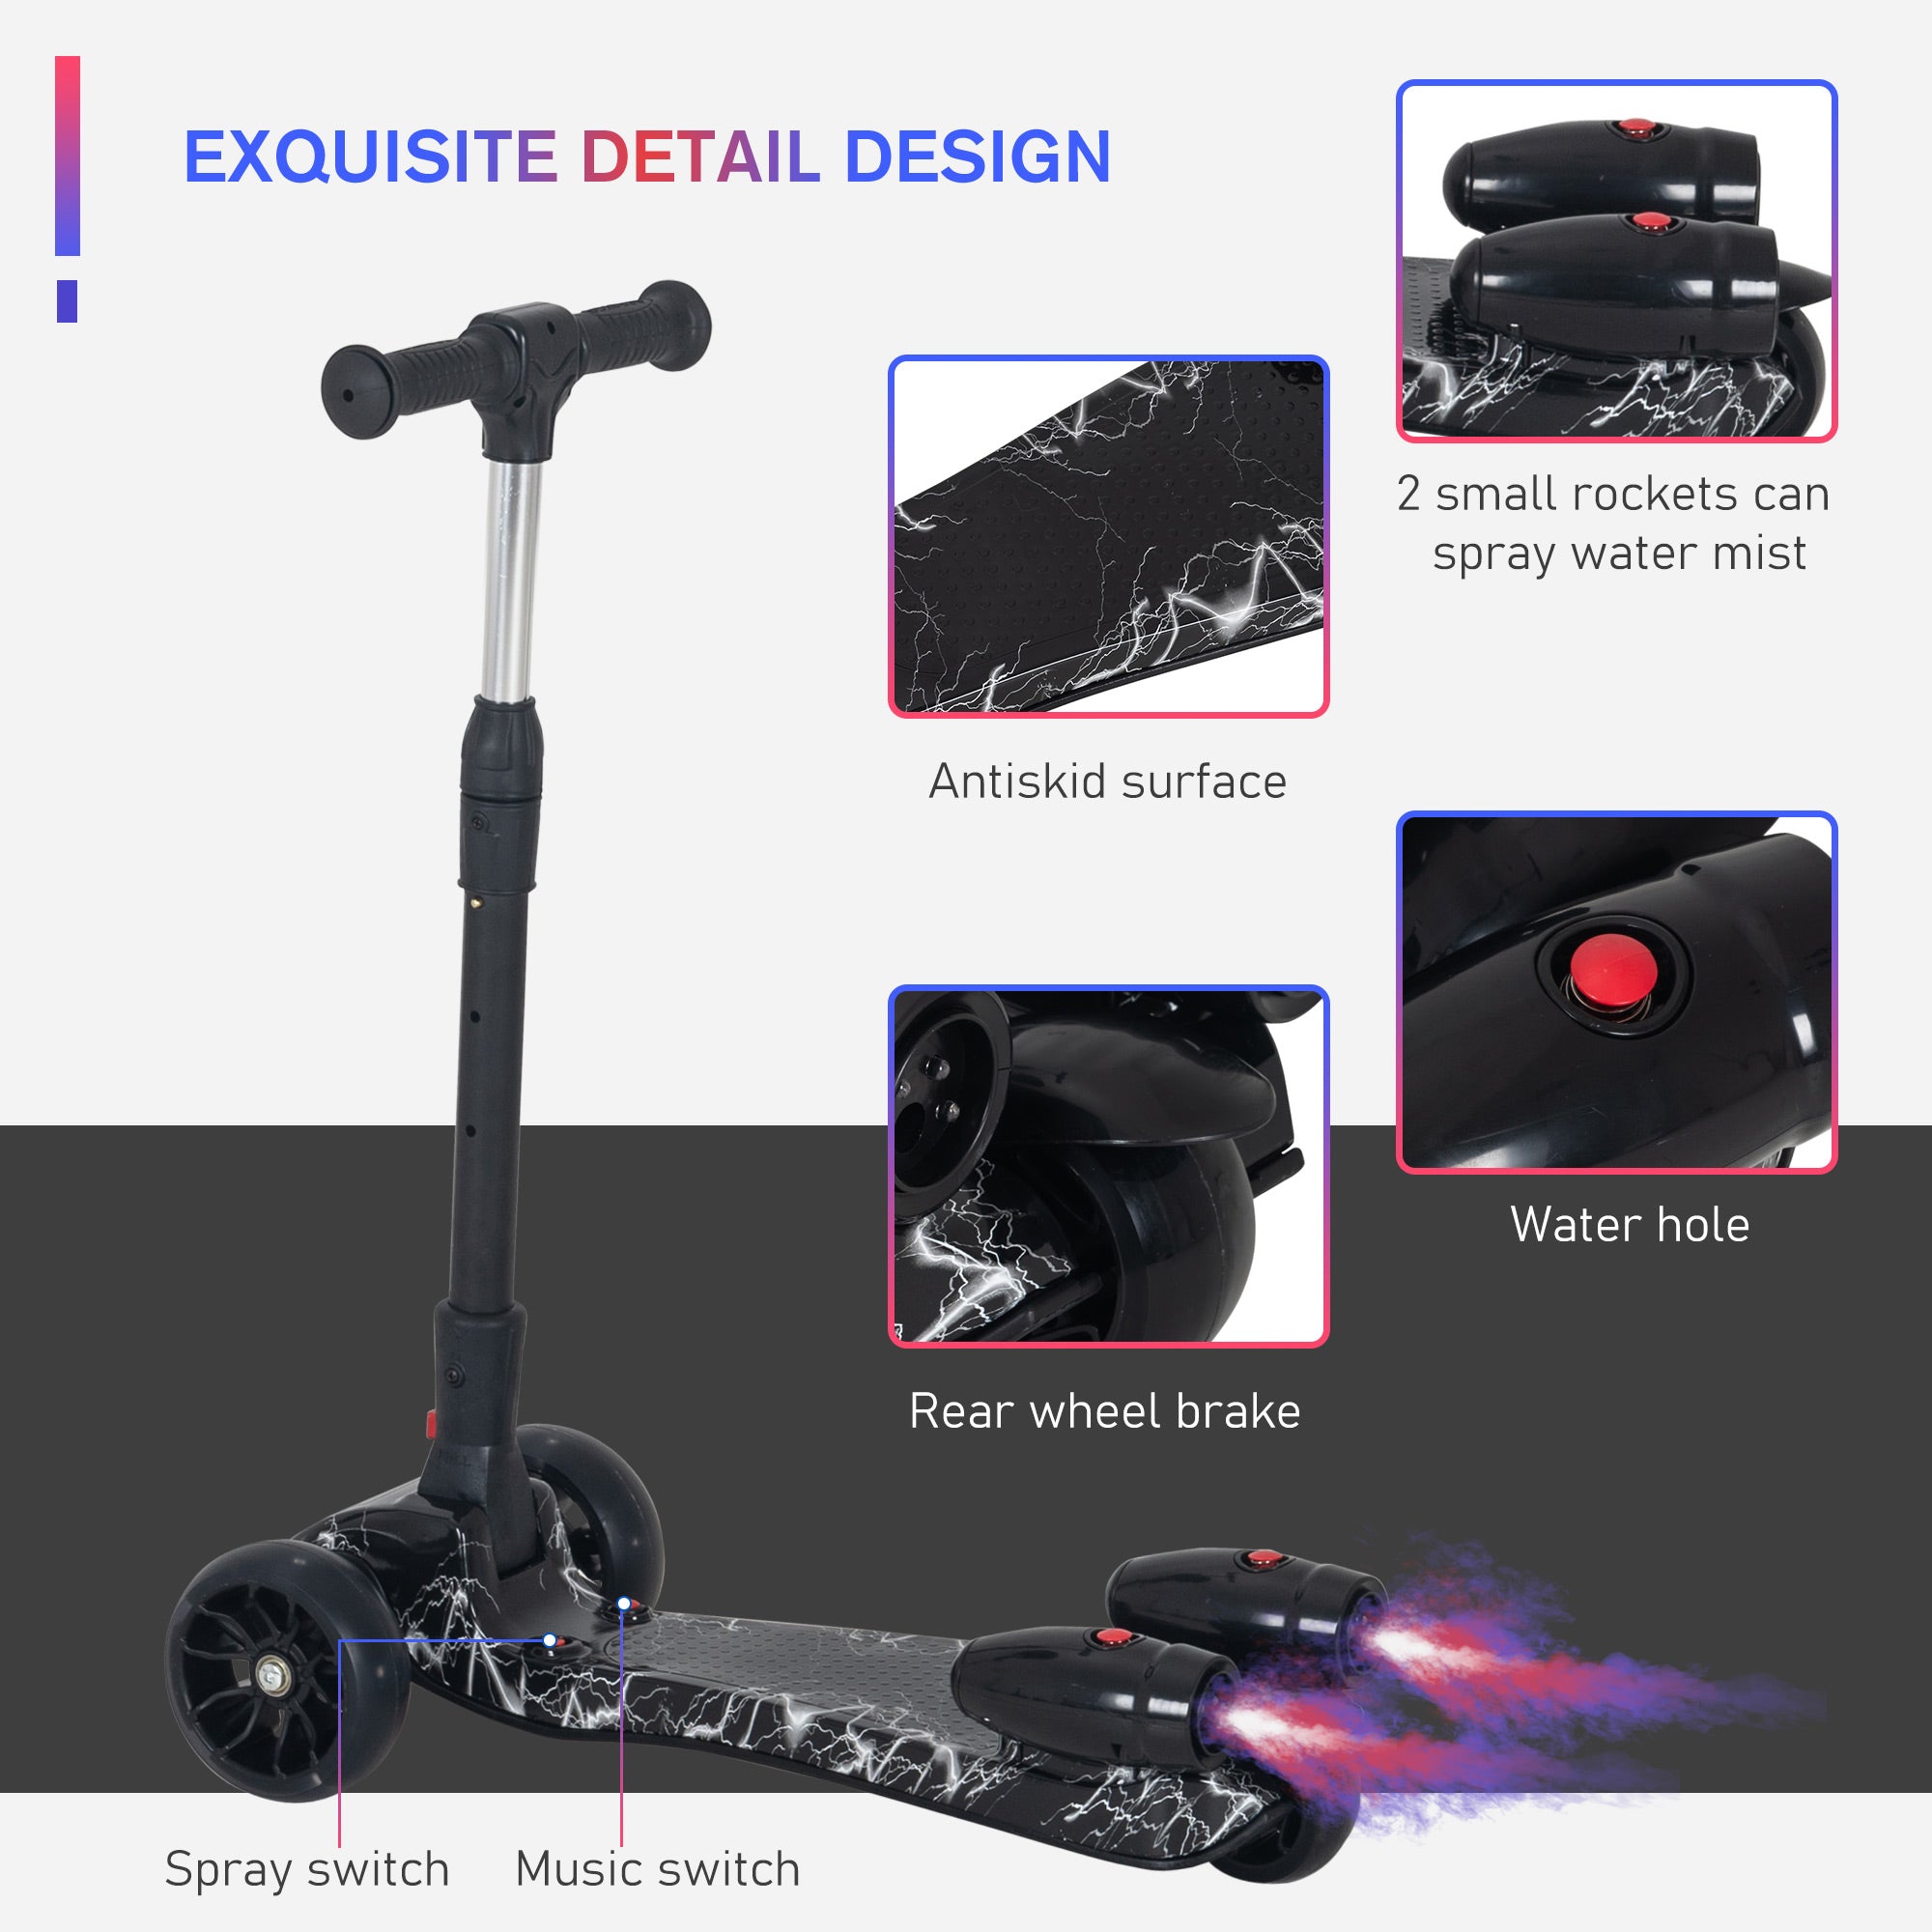 HOMCOM Kids 3 Wheel Scooter Adjustable Height w/ Flashing Wheels Music Water Spray Foldable Design Cool On Off Road Vehicle Black - Inspirely